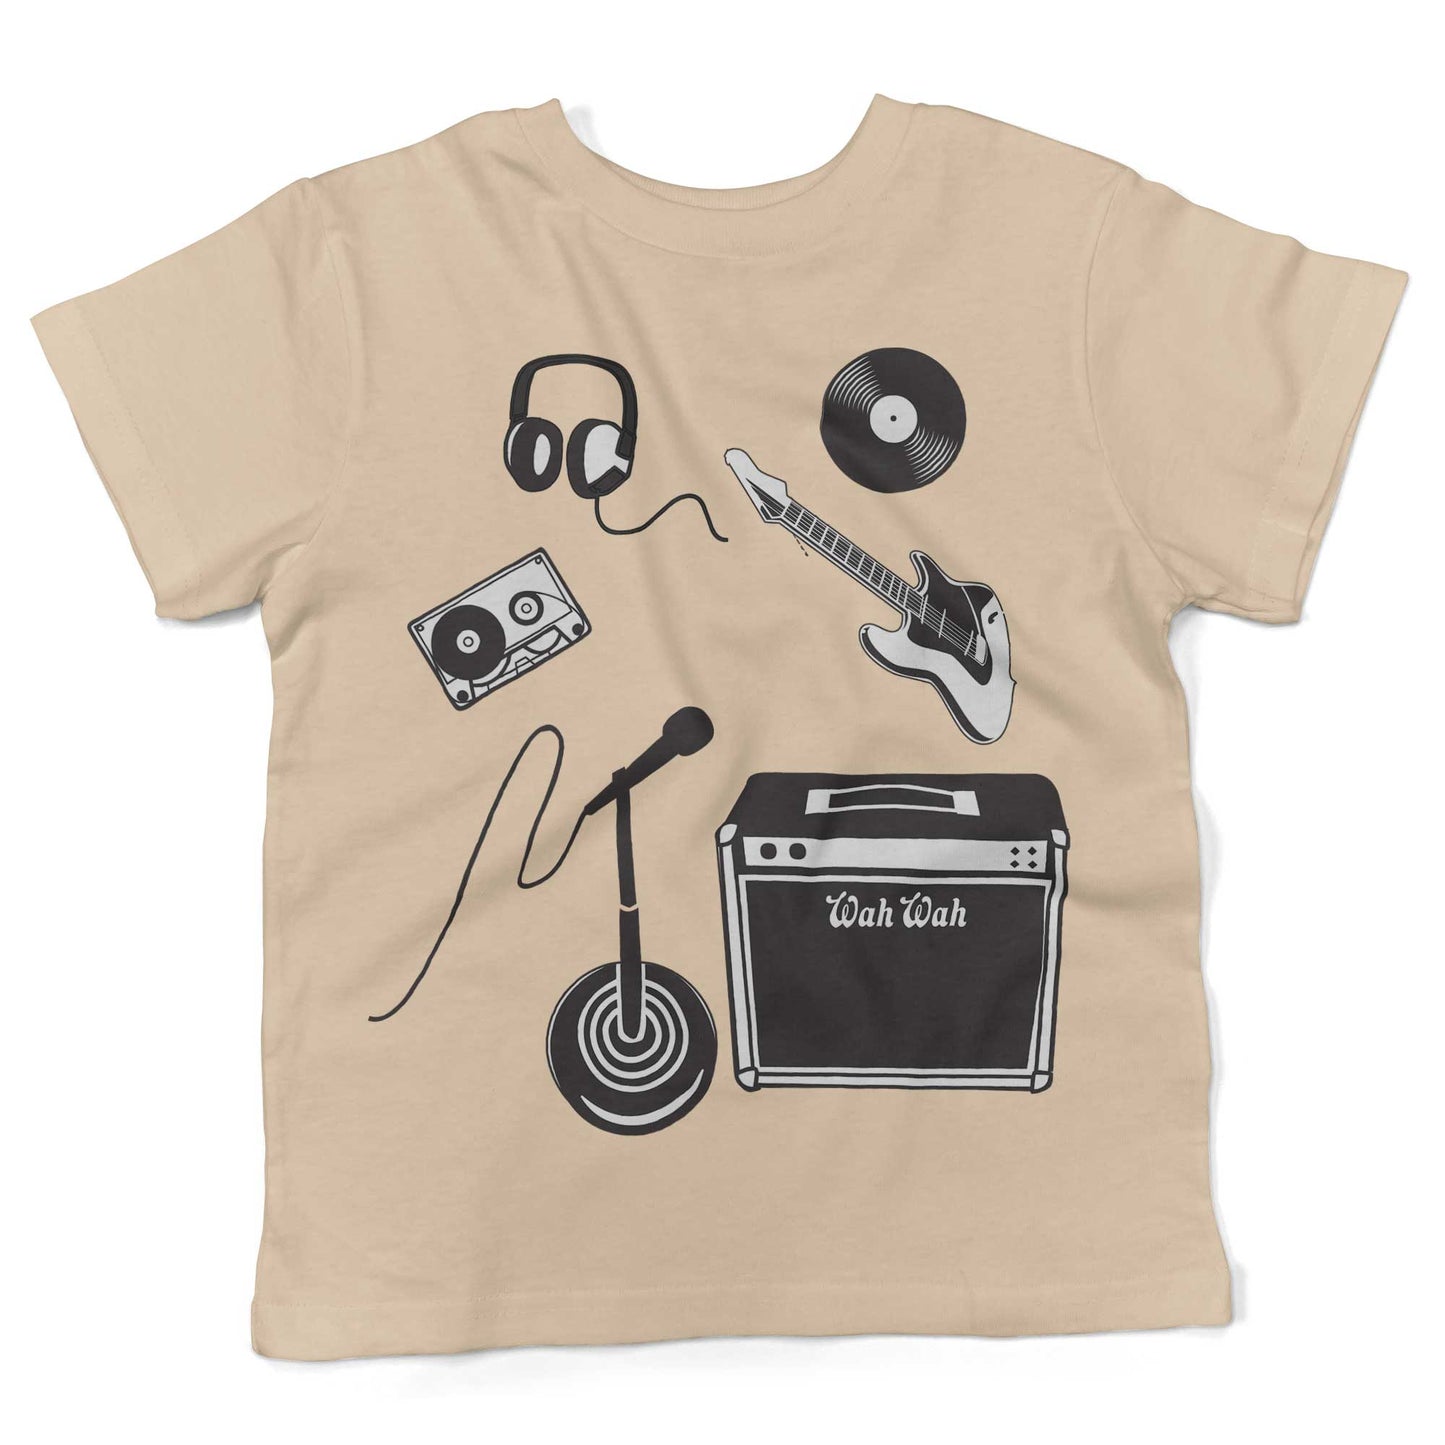 With The Band Toddler Shirt-Organic Natural-2T